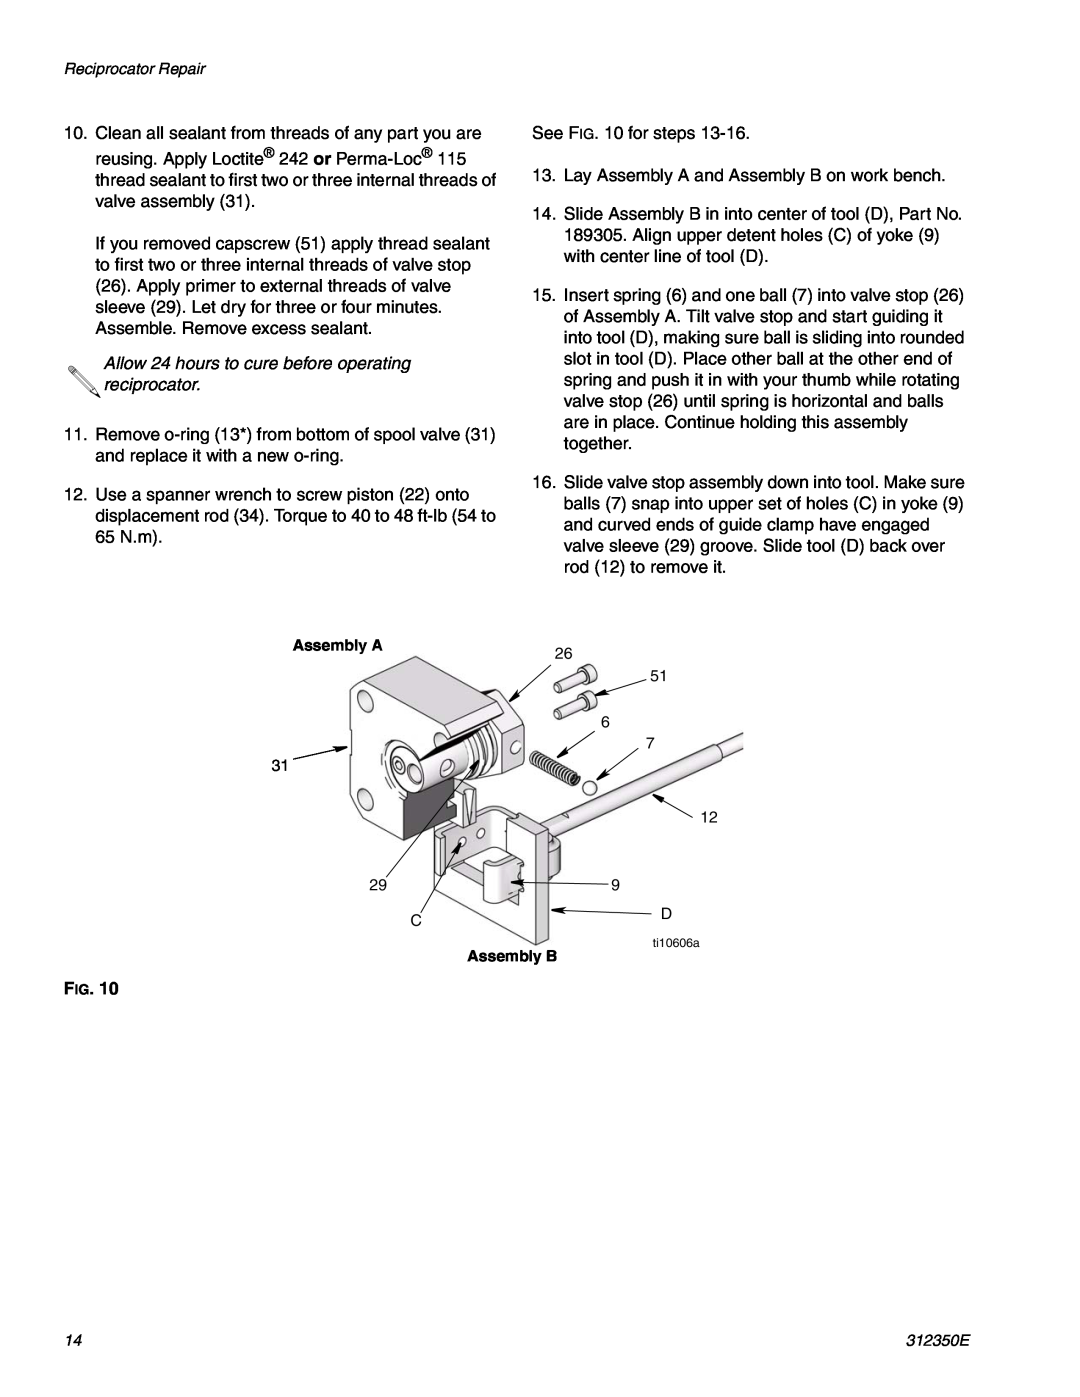 Hitachi 312350E important safety instructions See for steps 13. Lay Assembly A and Assembly B on work bench 